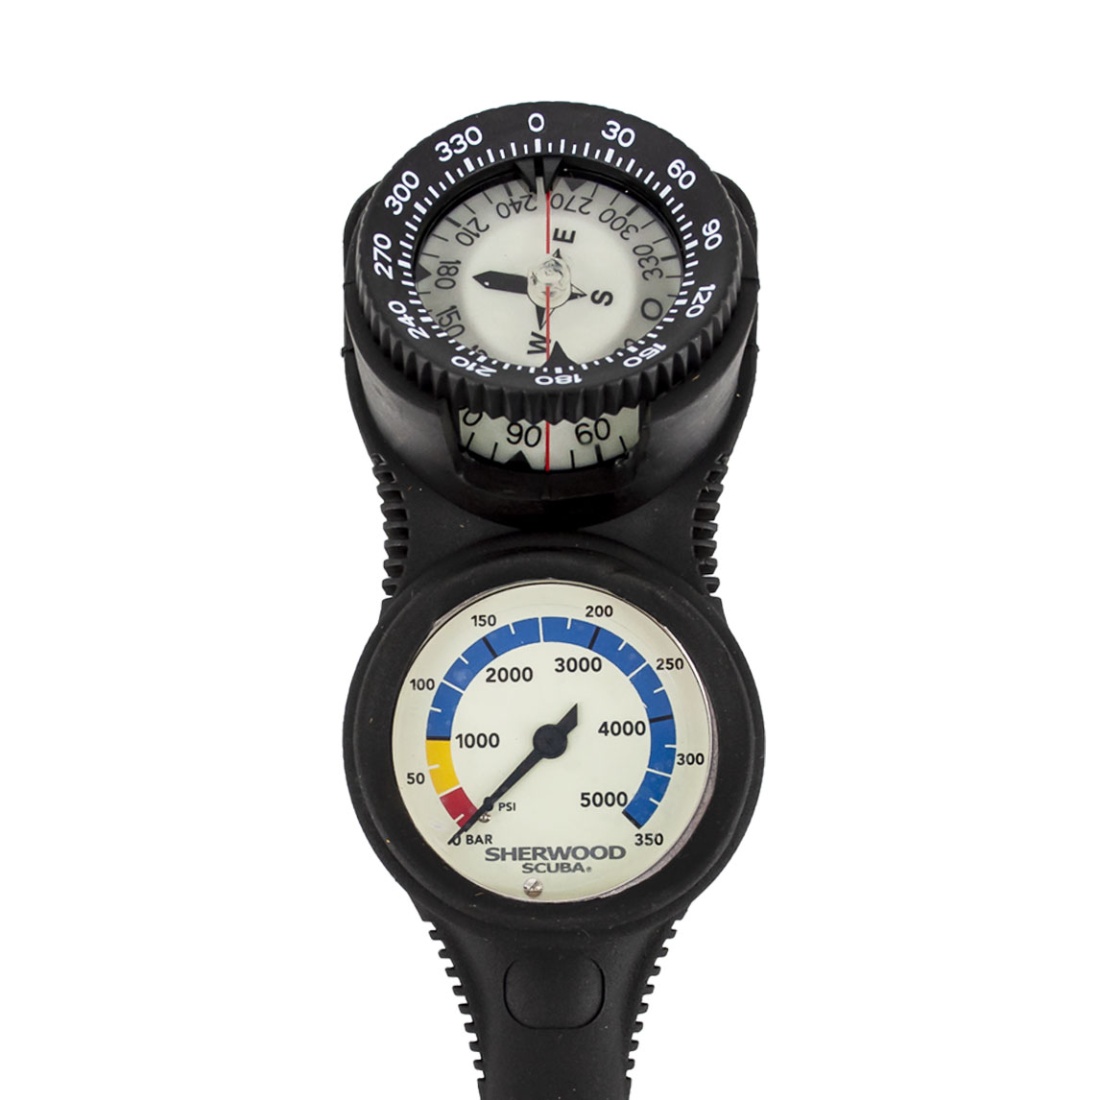 Sherwood 2 inch Pressure Gauge with Compass